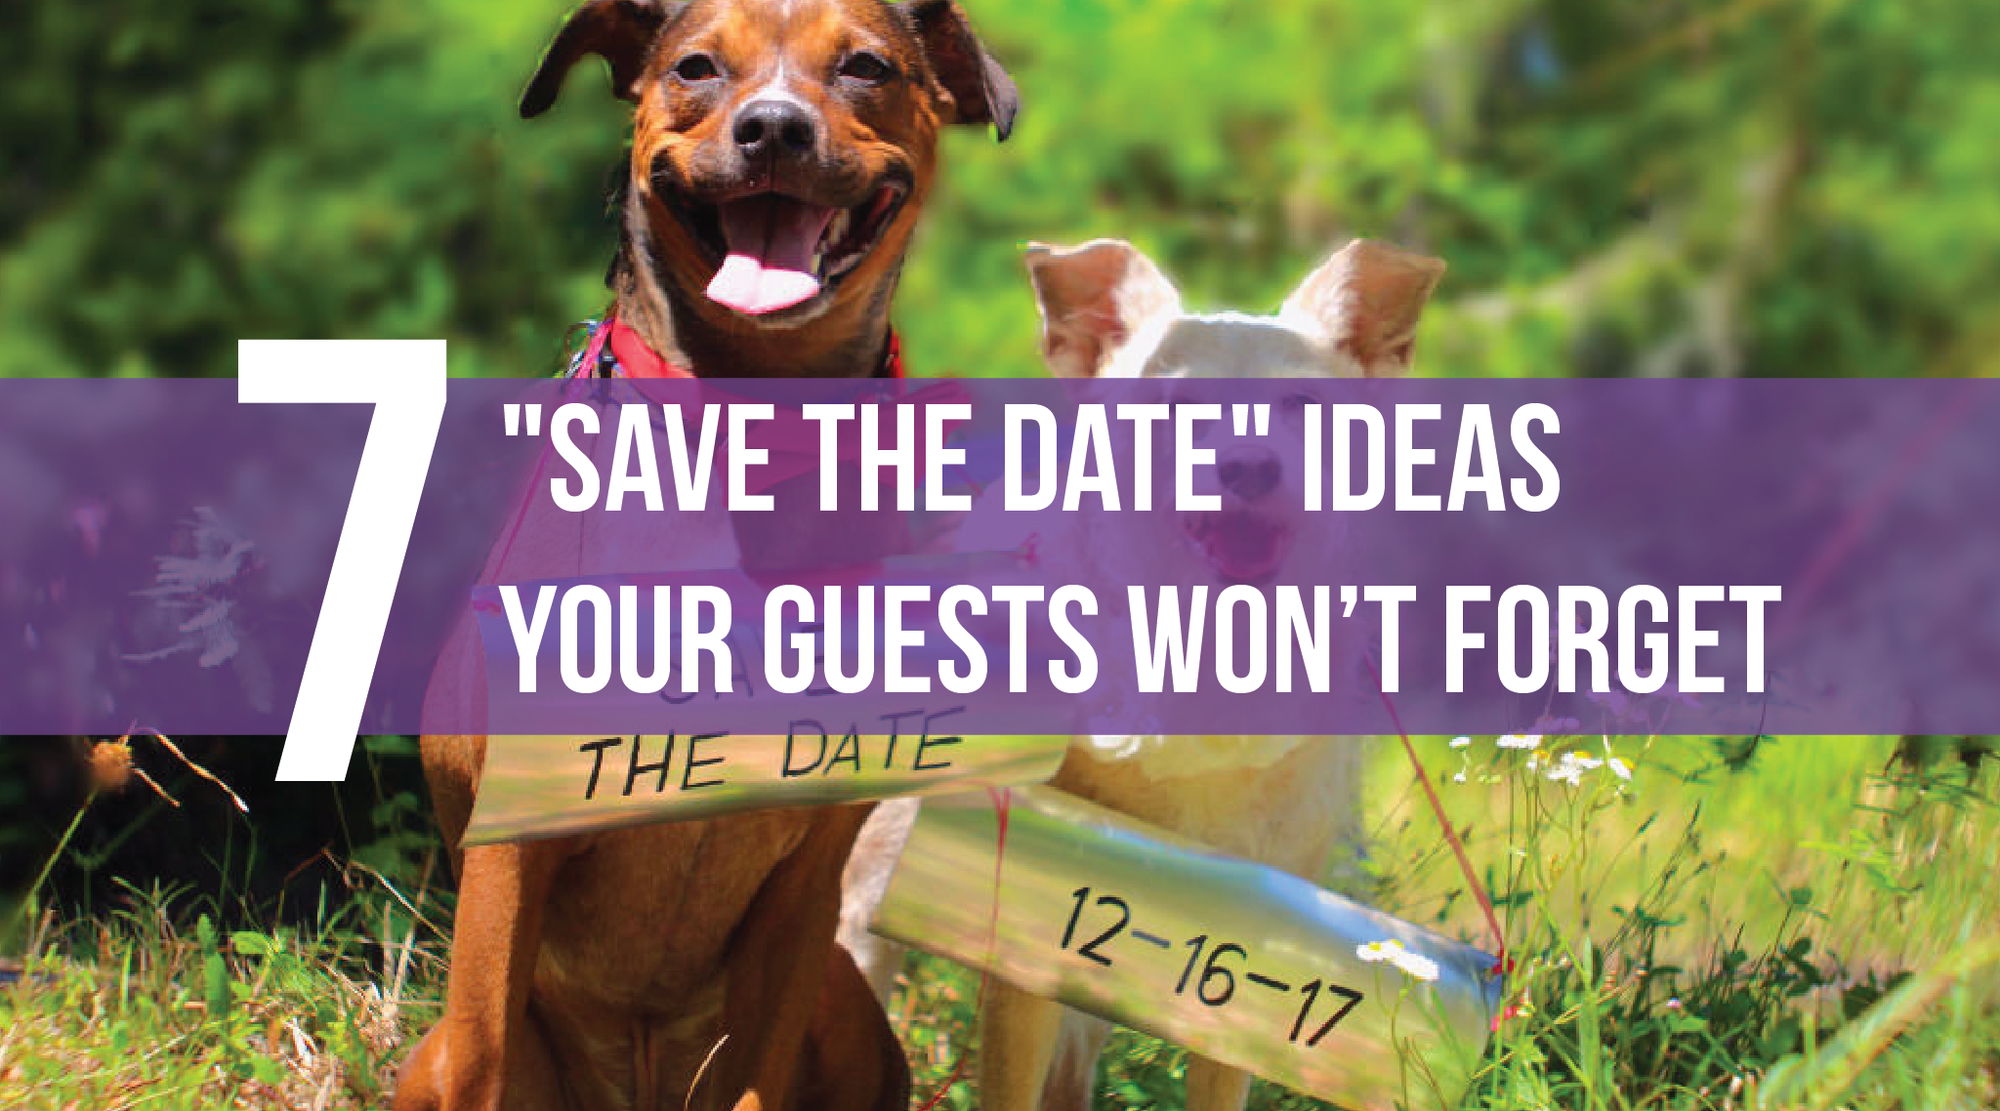 7 "Save The Date" Ideas Your Guests Won’t Forget